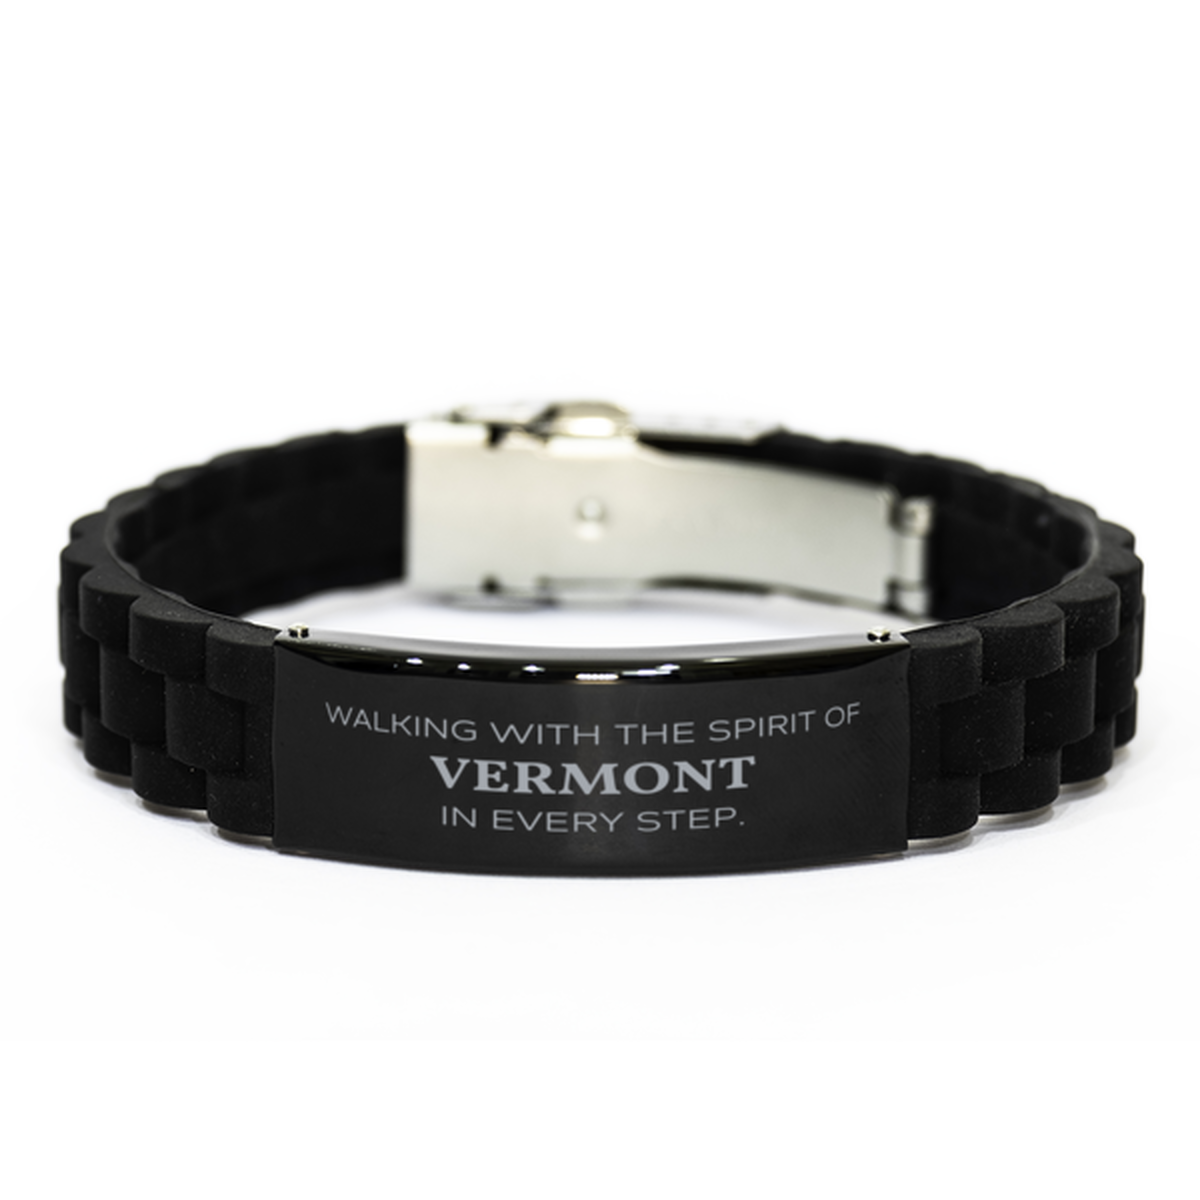 Vermont Gifts, Walking with the spirit, Love Vermont Birthday Christmas Black Glidelock Clasp Bracelet For Vermont People, Men, Women, Friends